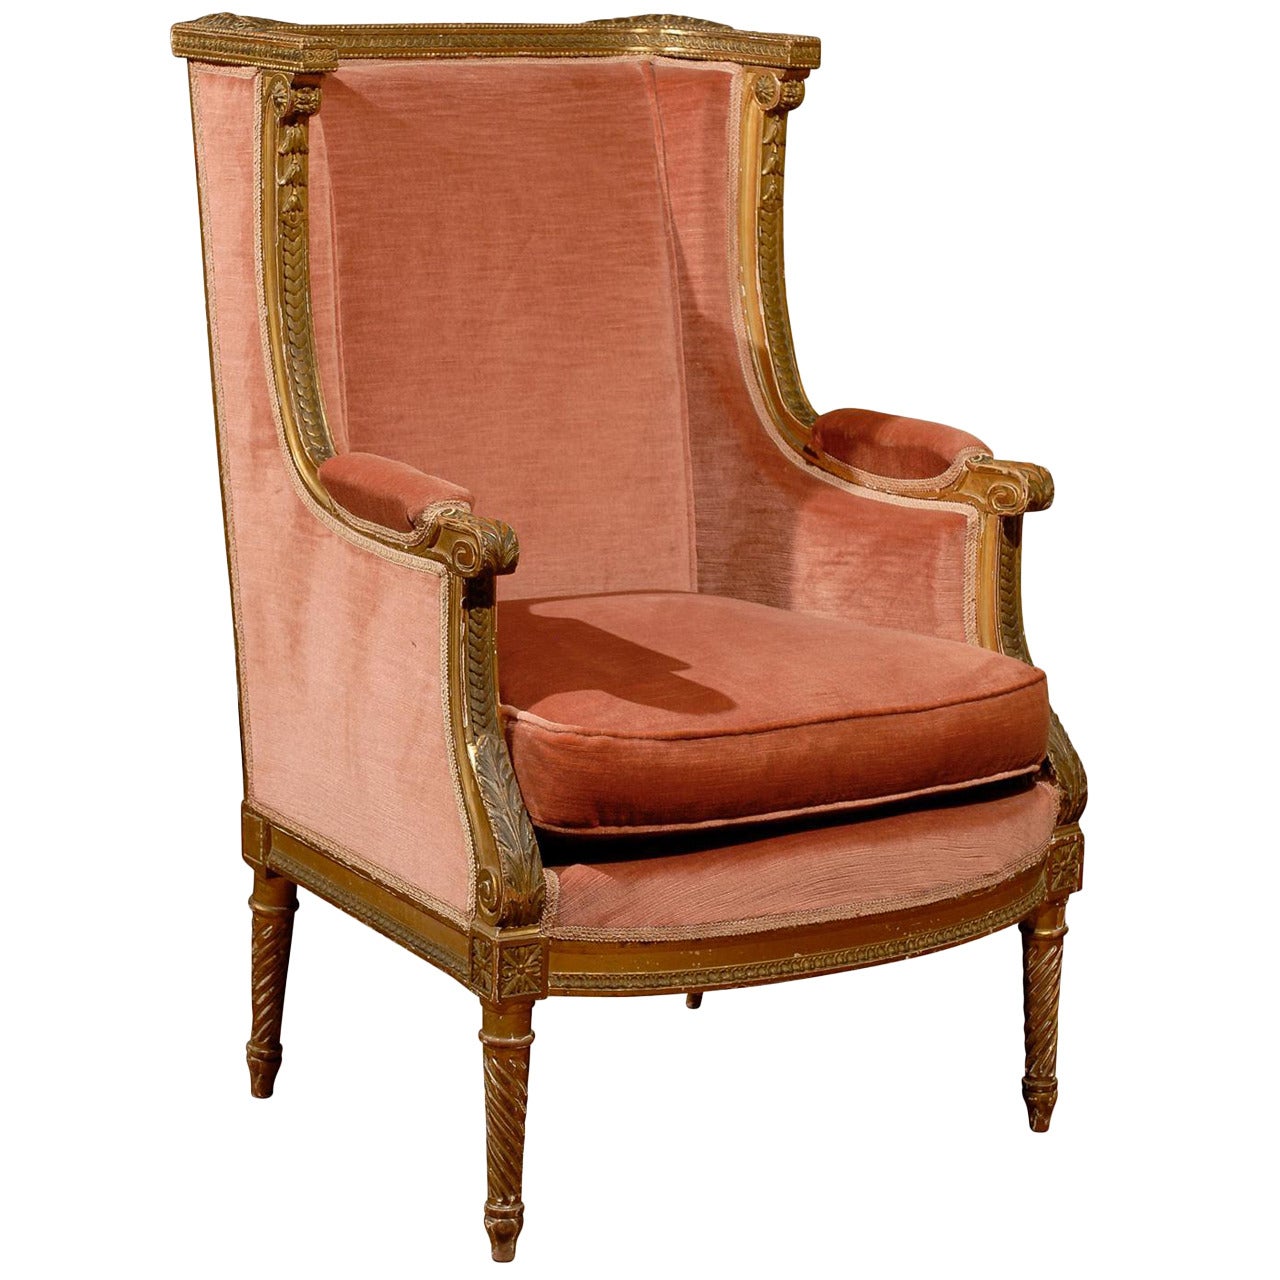 Early 19th Century Italian Upholstered Bergère